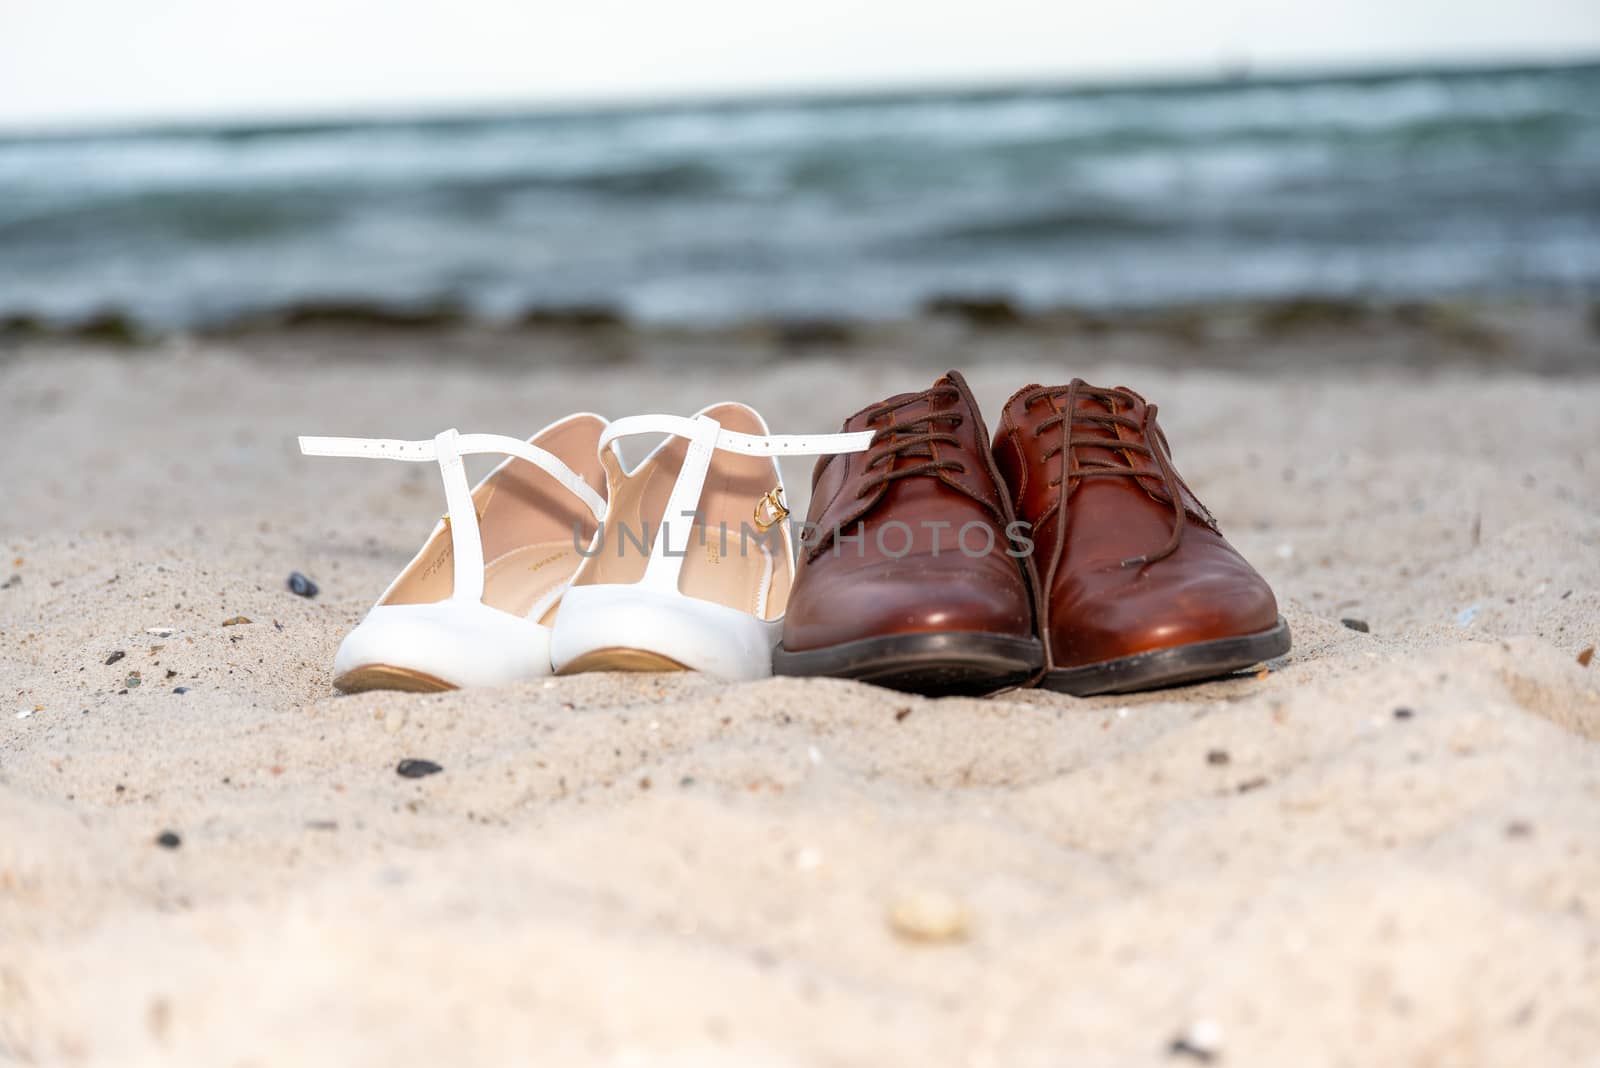 Fehmarn, Schleswig-Holstein/Germany - 03.09.2019: A white pair of ladies' shoes and a pair of brown men's shoes are standing on the beach in the sand with water in the background.